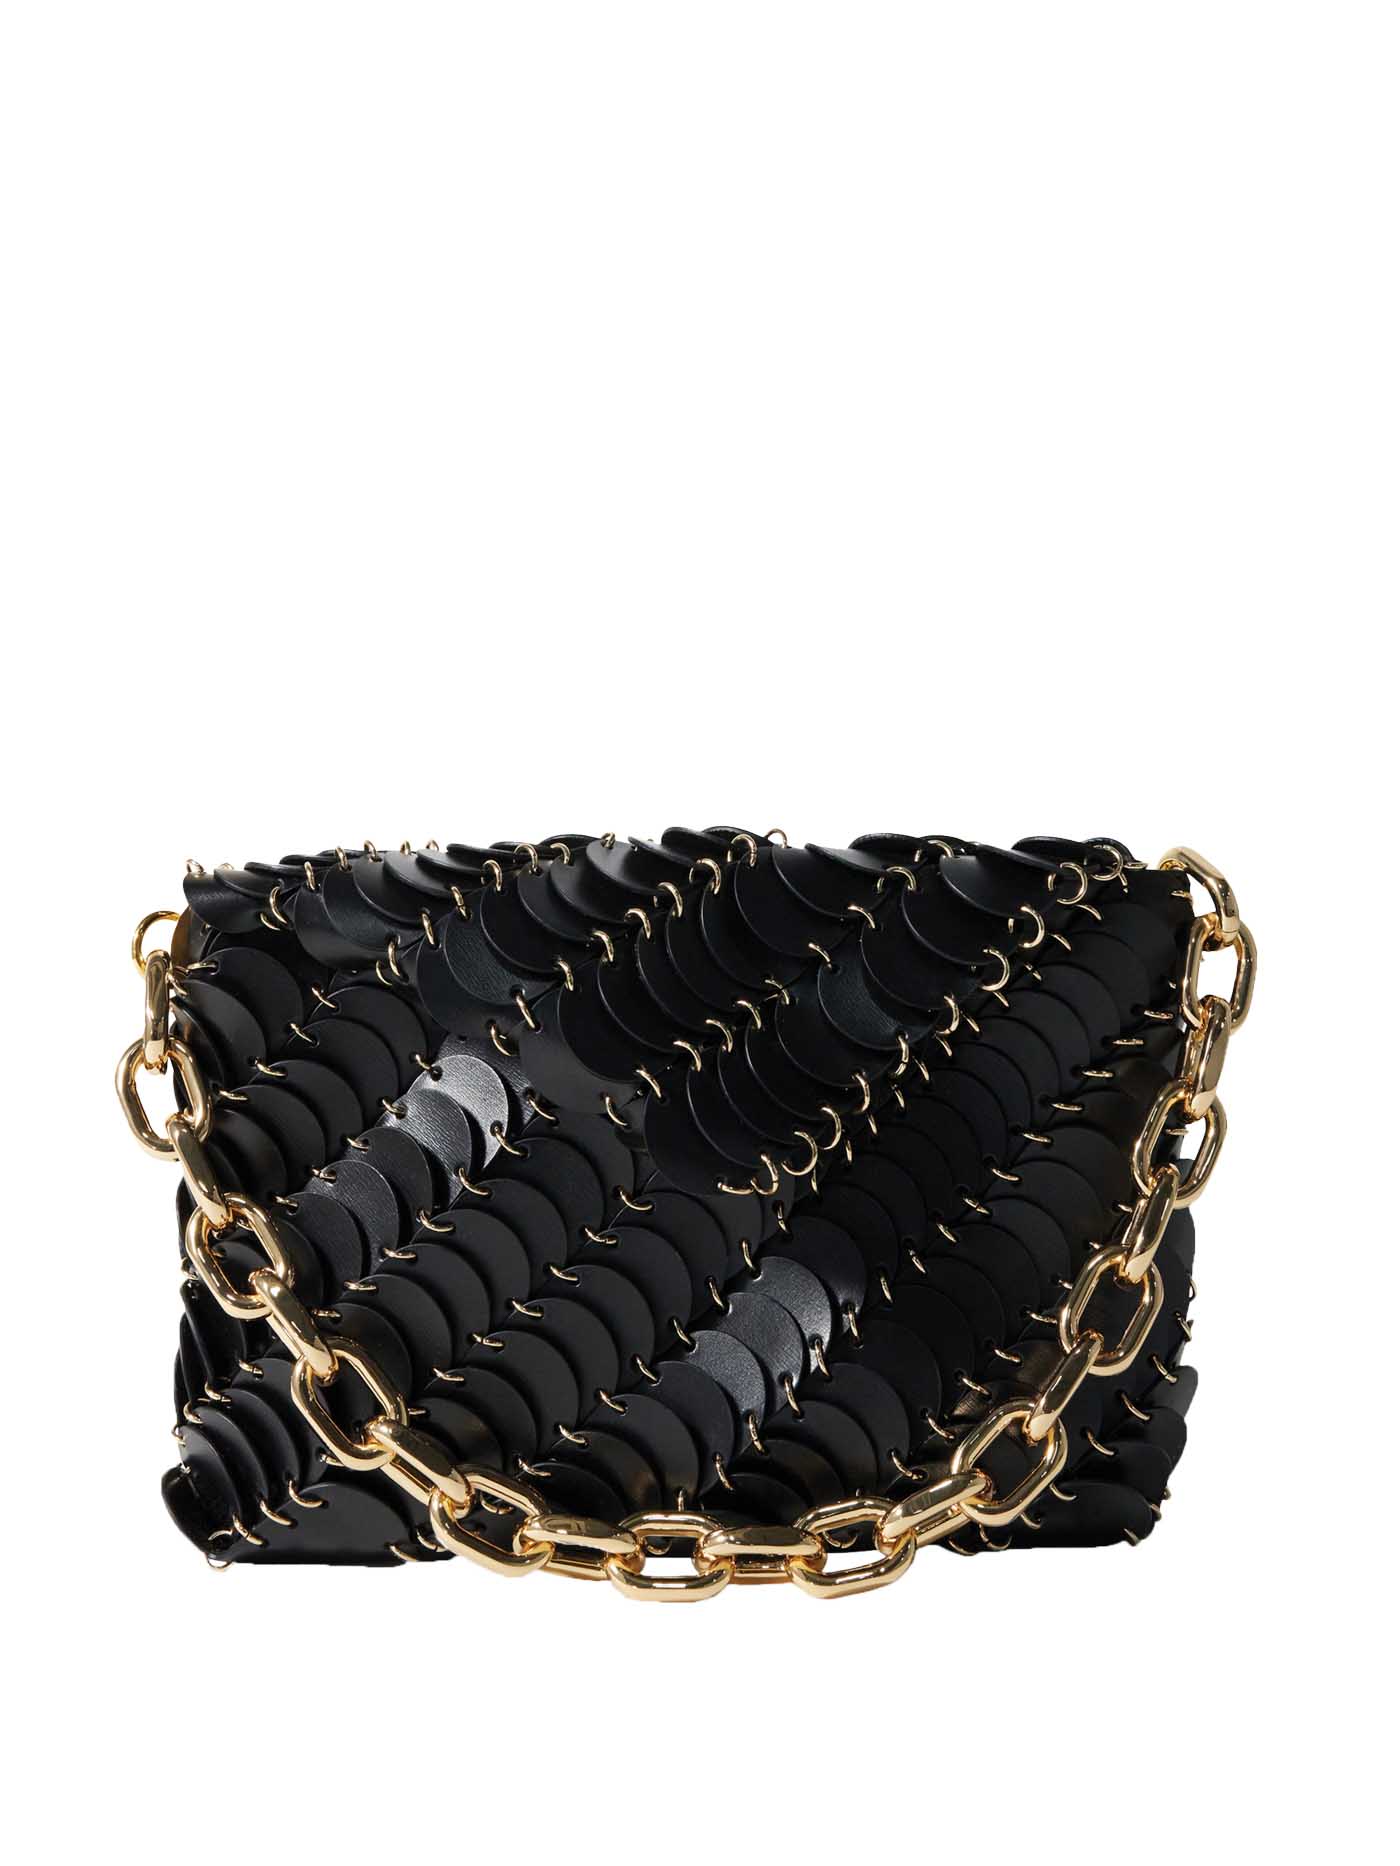 34 Paco Rabanne, Leather Chainmail Shoulder Bag, Matchesfashion.com.us